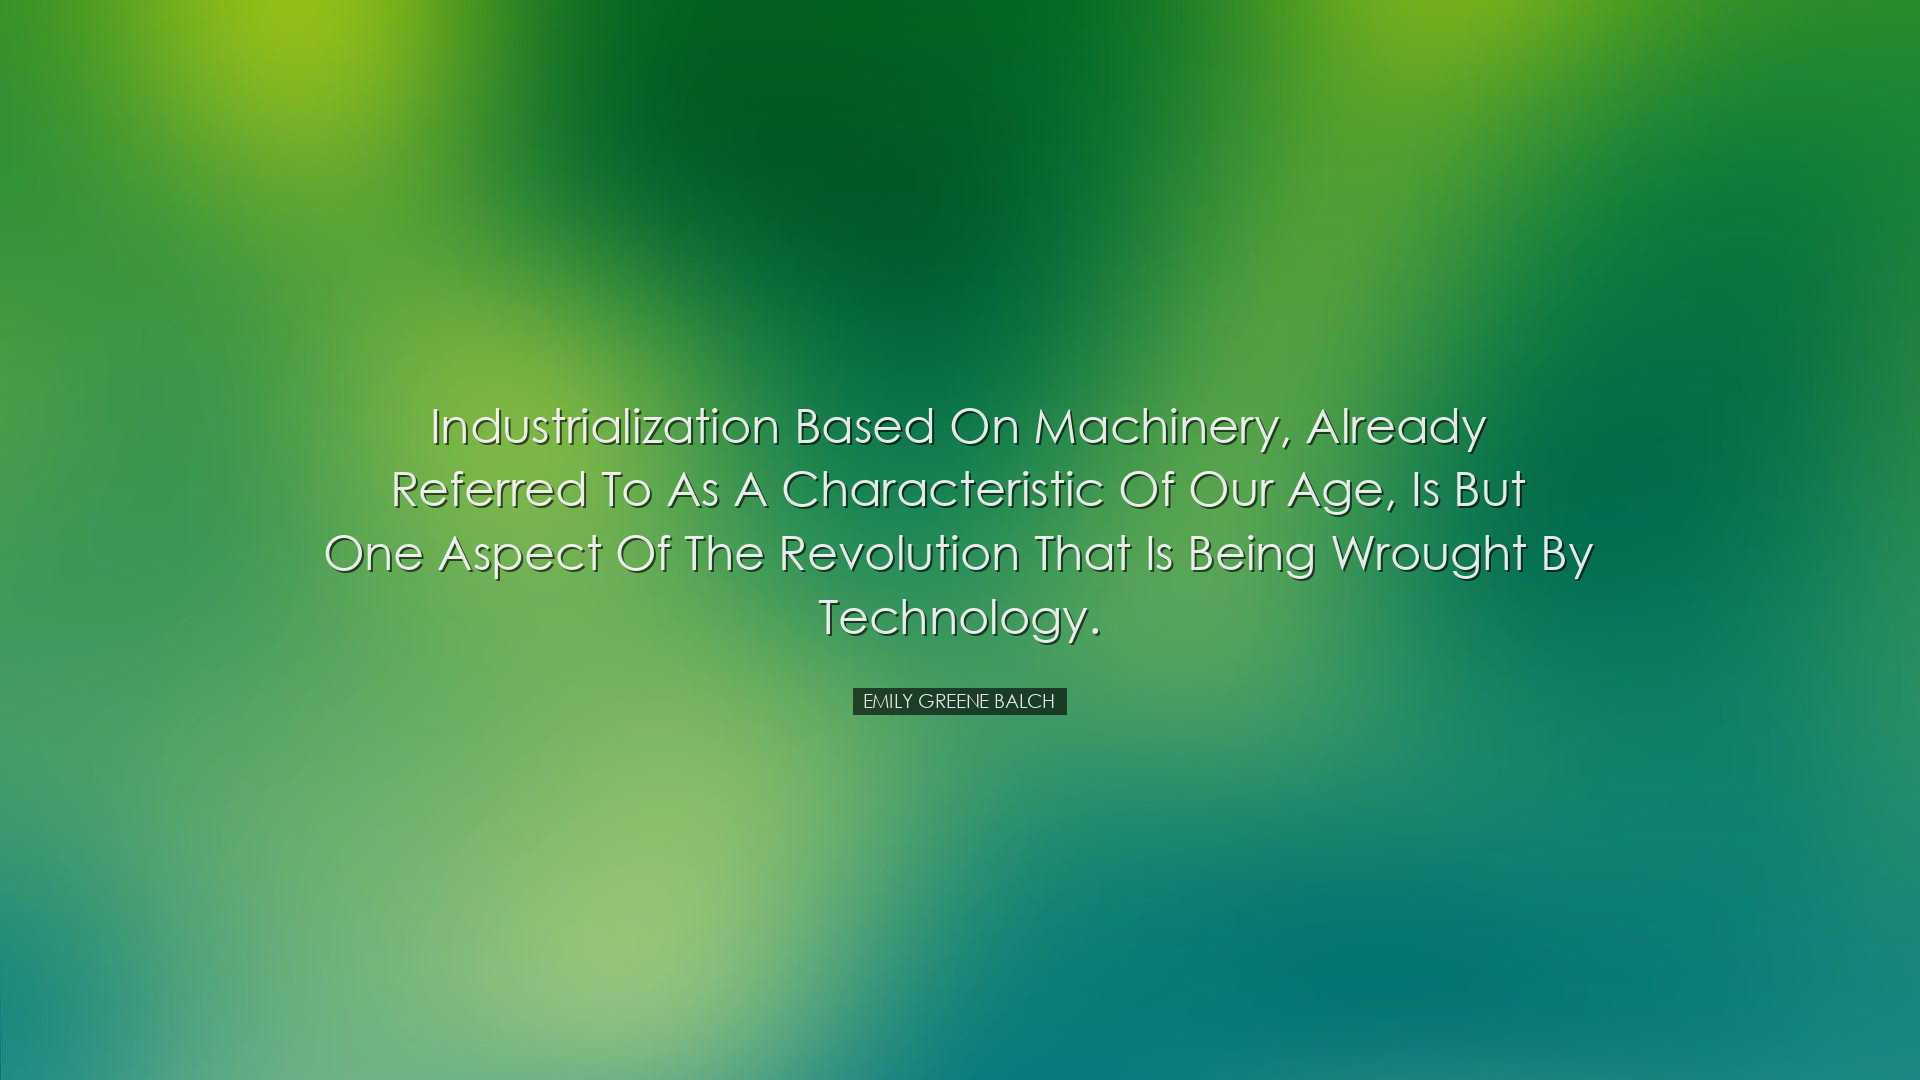 Industrialization based on machinery, already referred to as a cha